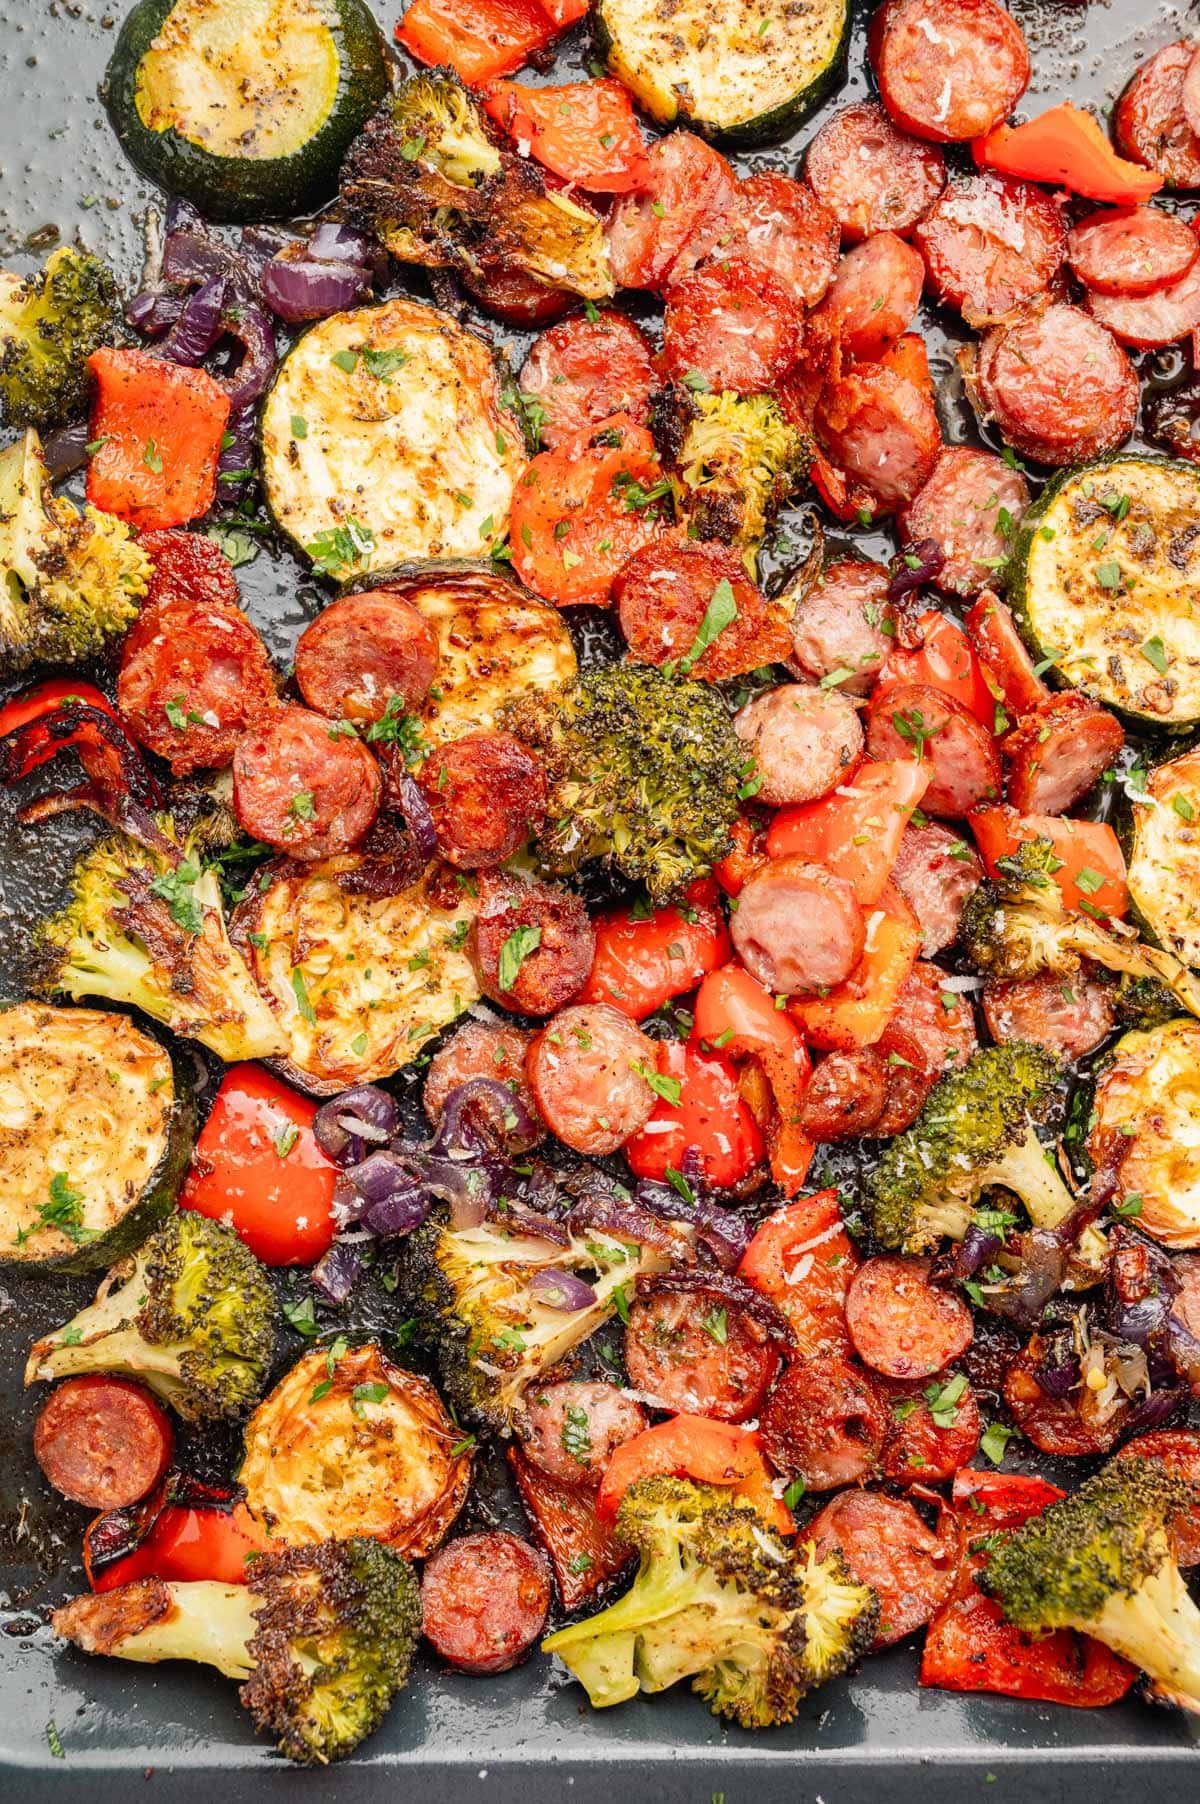 Roasted sausage and vegetables on a sheet pan.